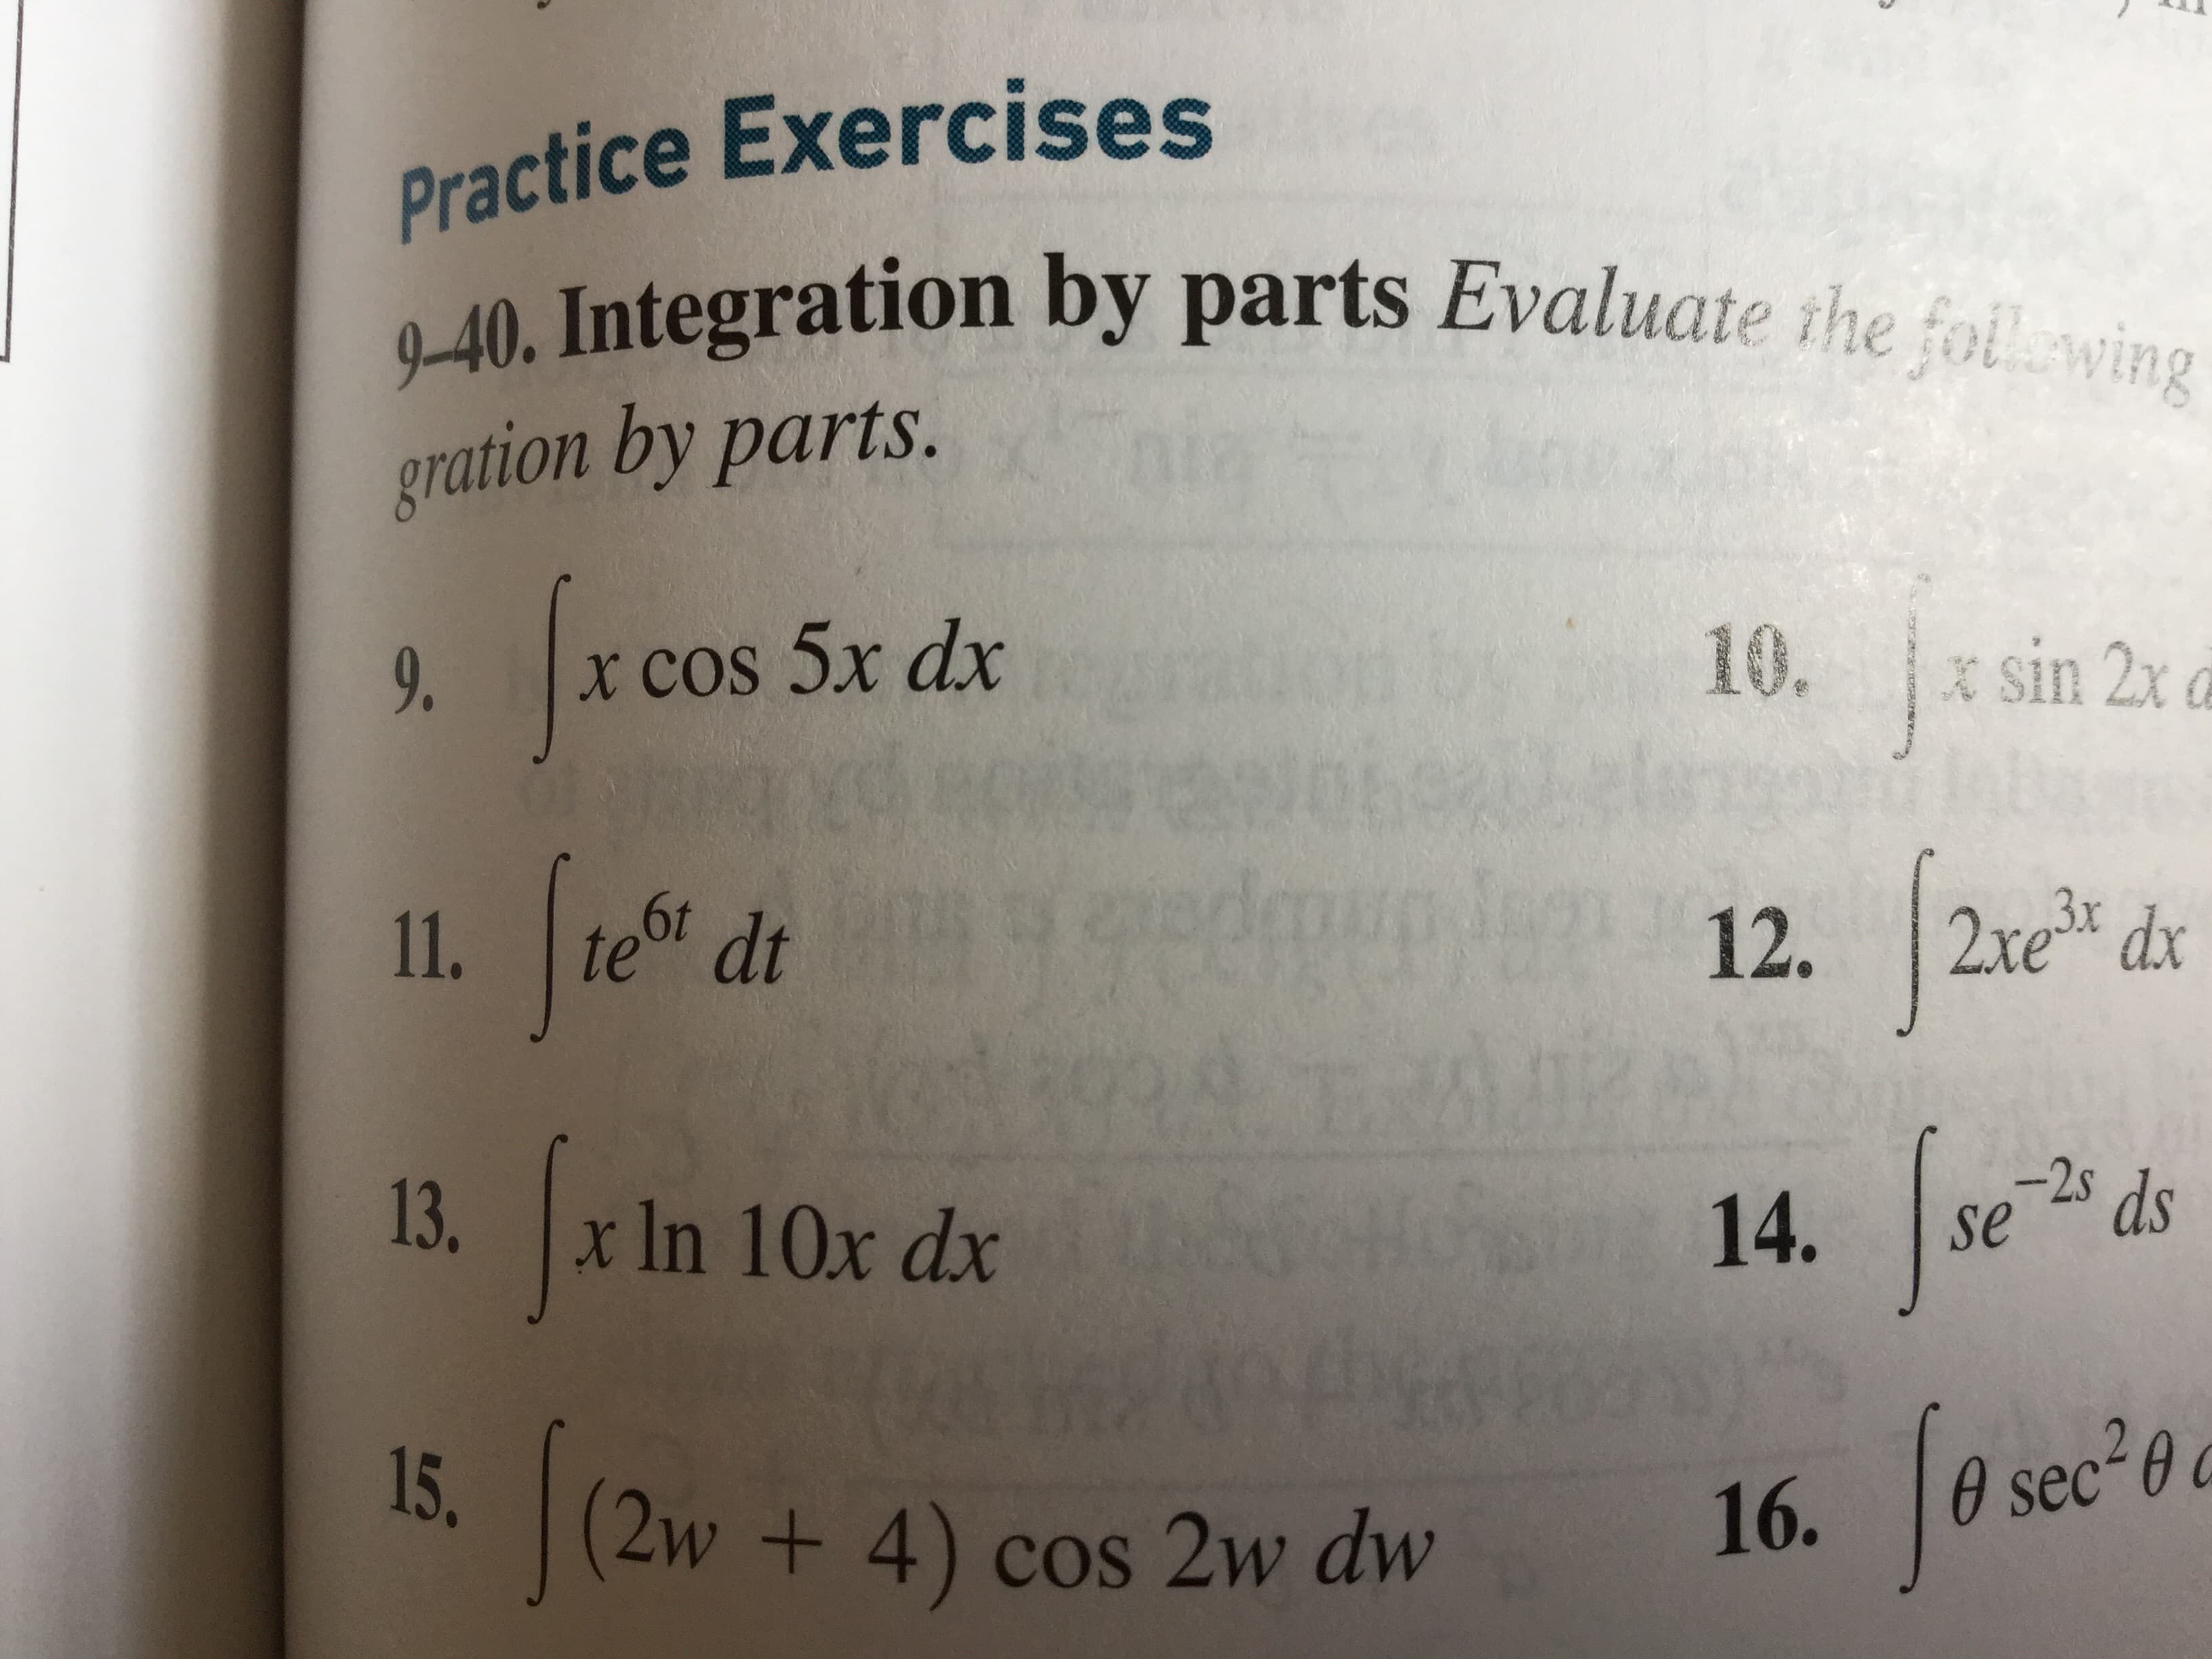 Practice Exercises
9-40. Integration by parts Evaluate the follwing
gration by parts.
9.
* cos 5x dx
10.
* sin 2x a
11.
te dt
6F
12. 2re dx
13,
x 1n 10x dx
-2s
se
ds
14.
's
sec 0
15.
(2w + 4) cos 2w dw
16.
